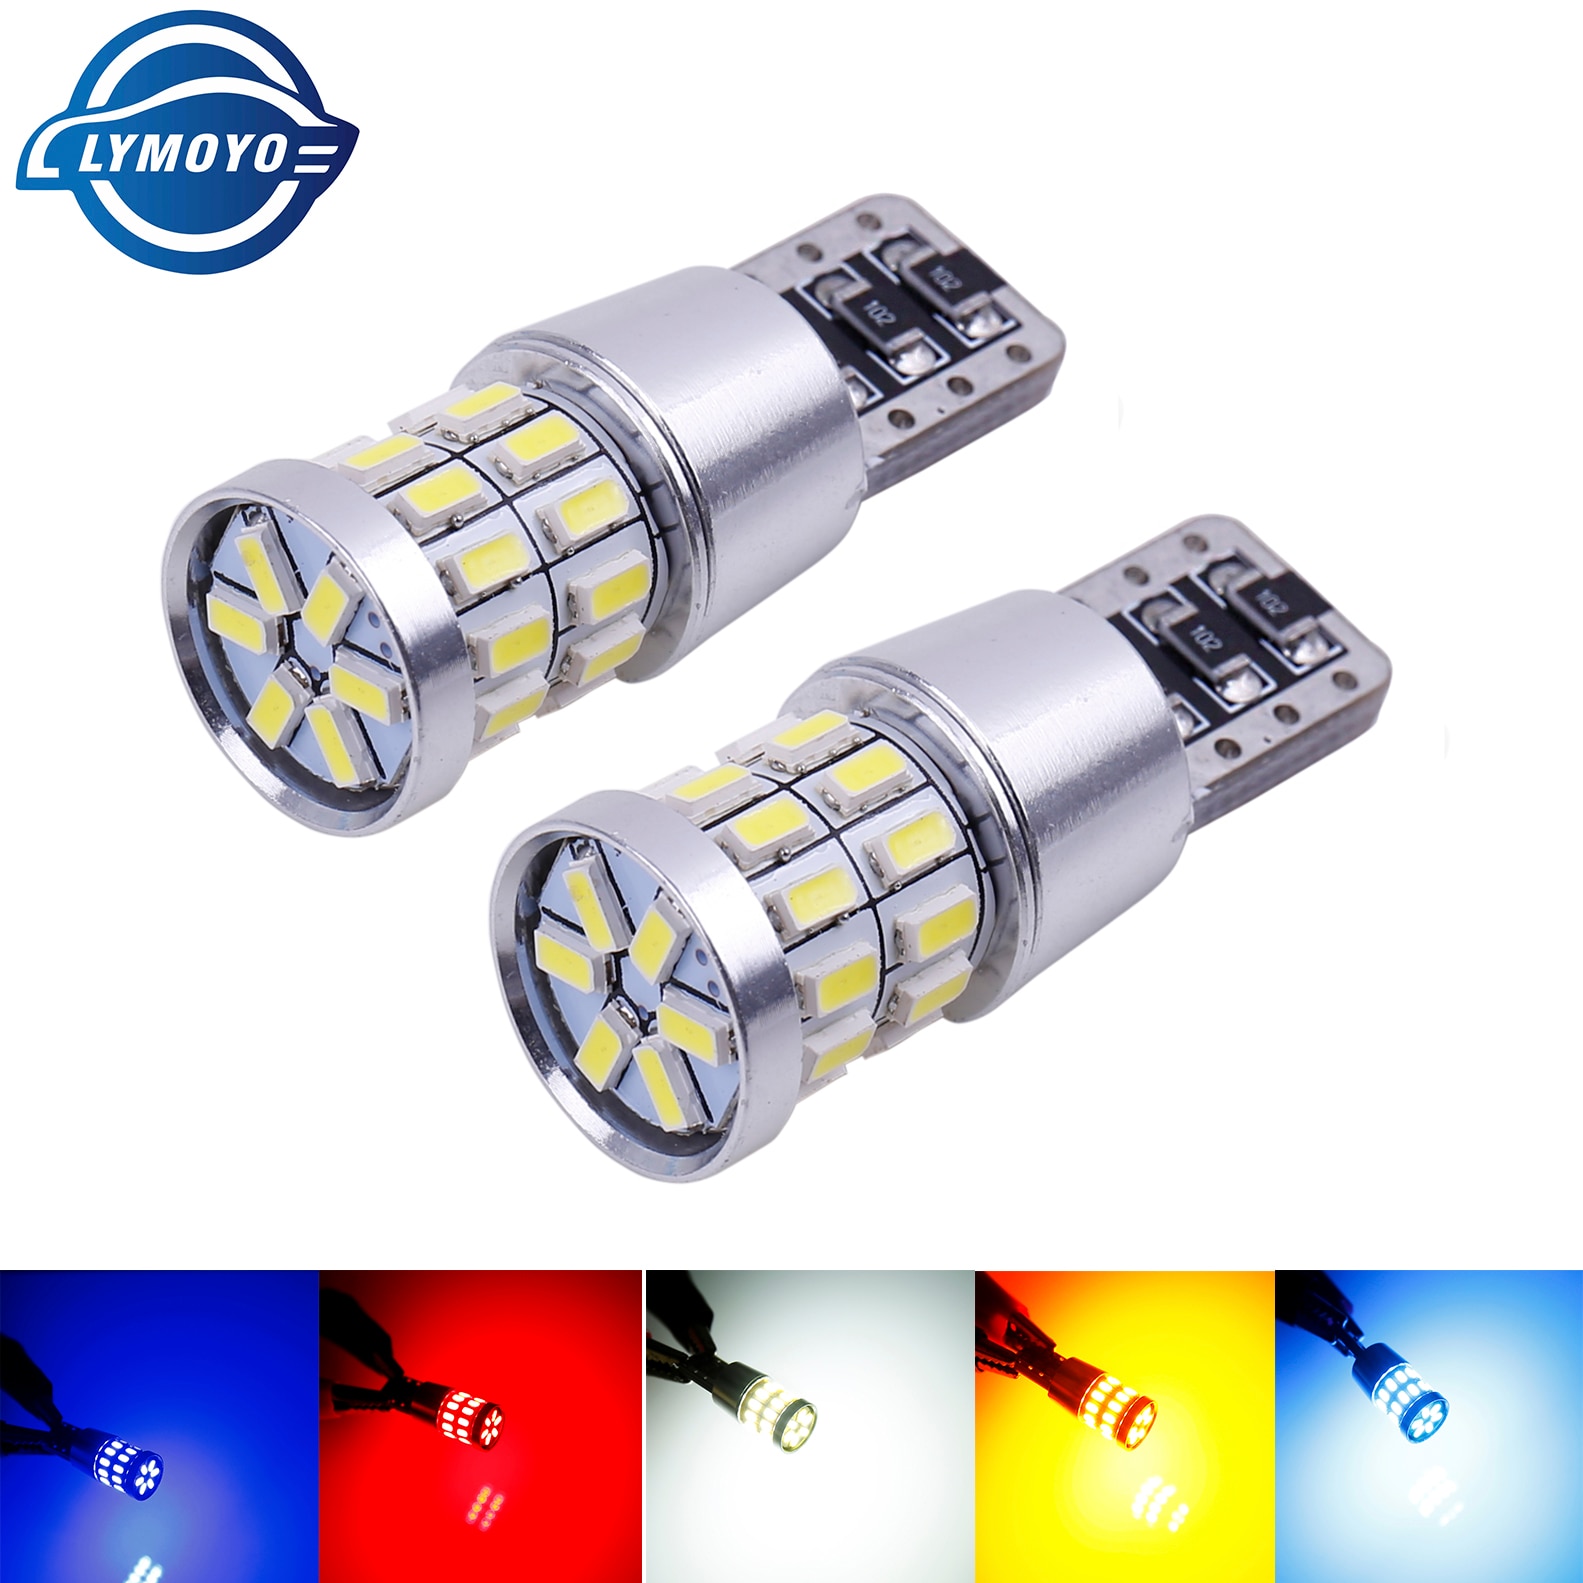 1pcs T10 W5W LED Lamp 194 168 Canbus Geen fout Wit Licht 3014 30 SMD Voor Auto Interieur Dome kentekenverlichting Lamp 12V